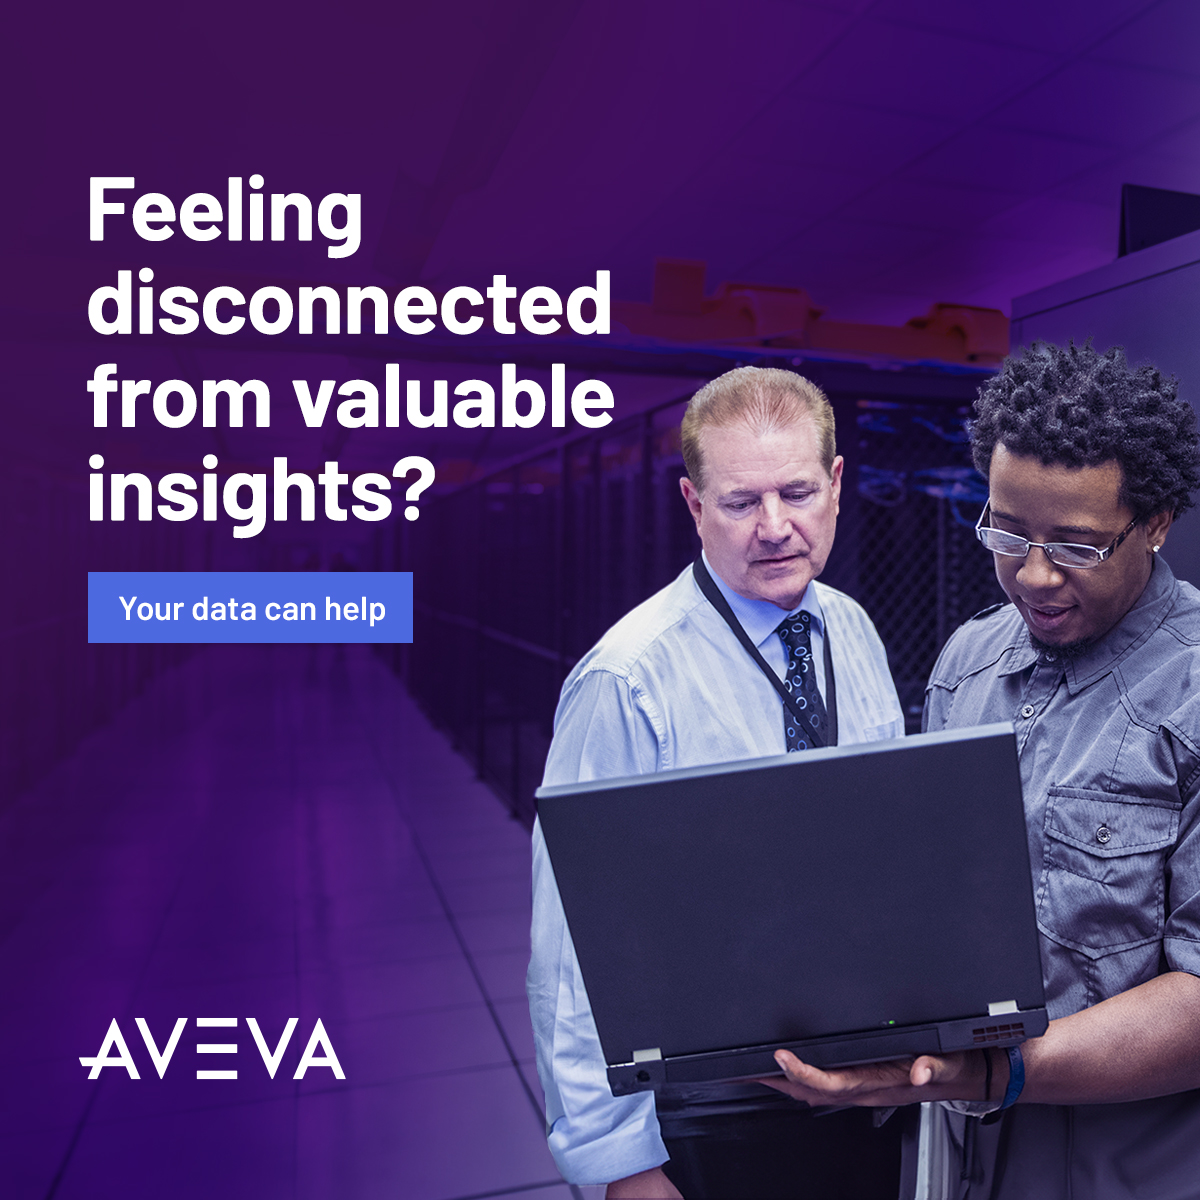 Bridge the gaps in your industrial 🏭 ecosystem and gain a 360° view of your #operations for faster, smarter business decisions.

Learn more about AVEVA Connect’s new features and advanced data services. Read the blog ➡️ bit.ly/3OJLsUu #cloud #datasharing #AVEVAConnect